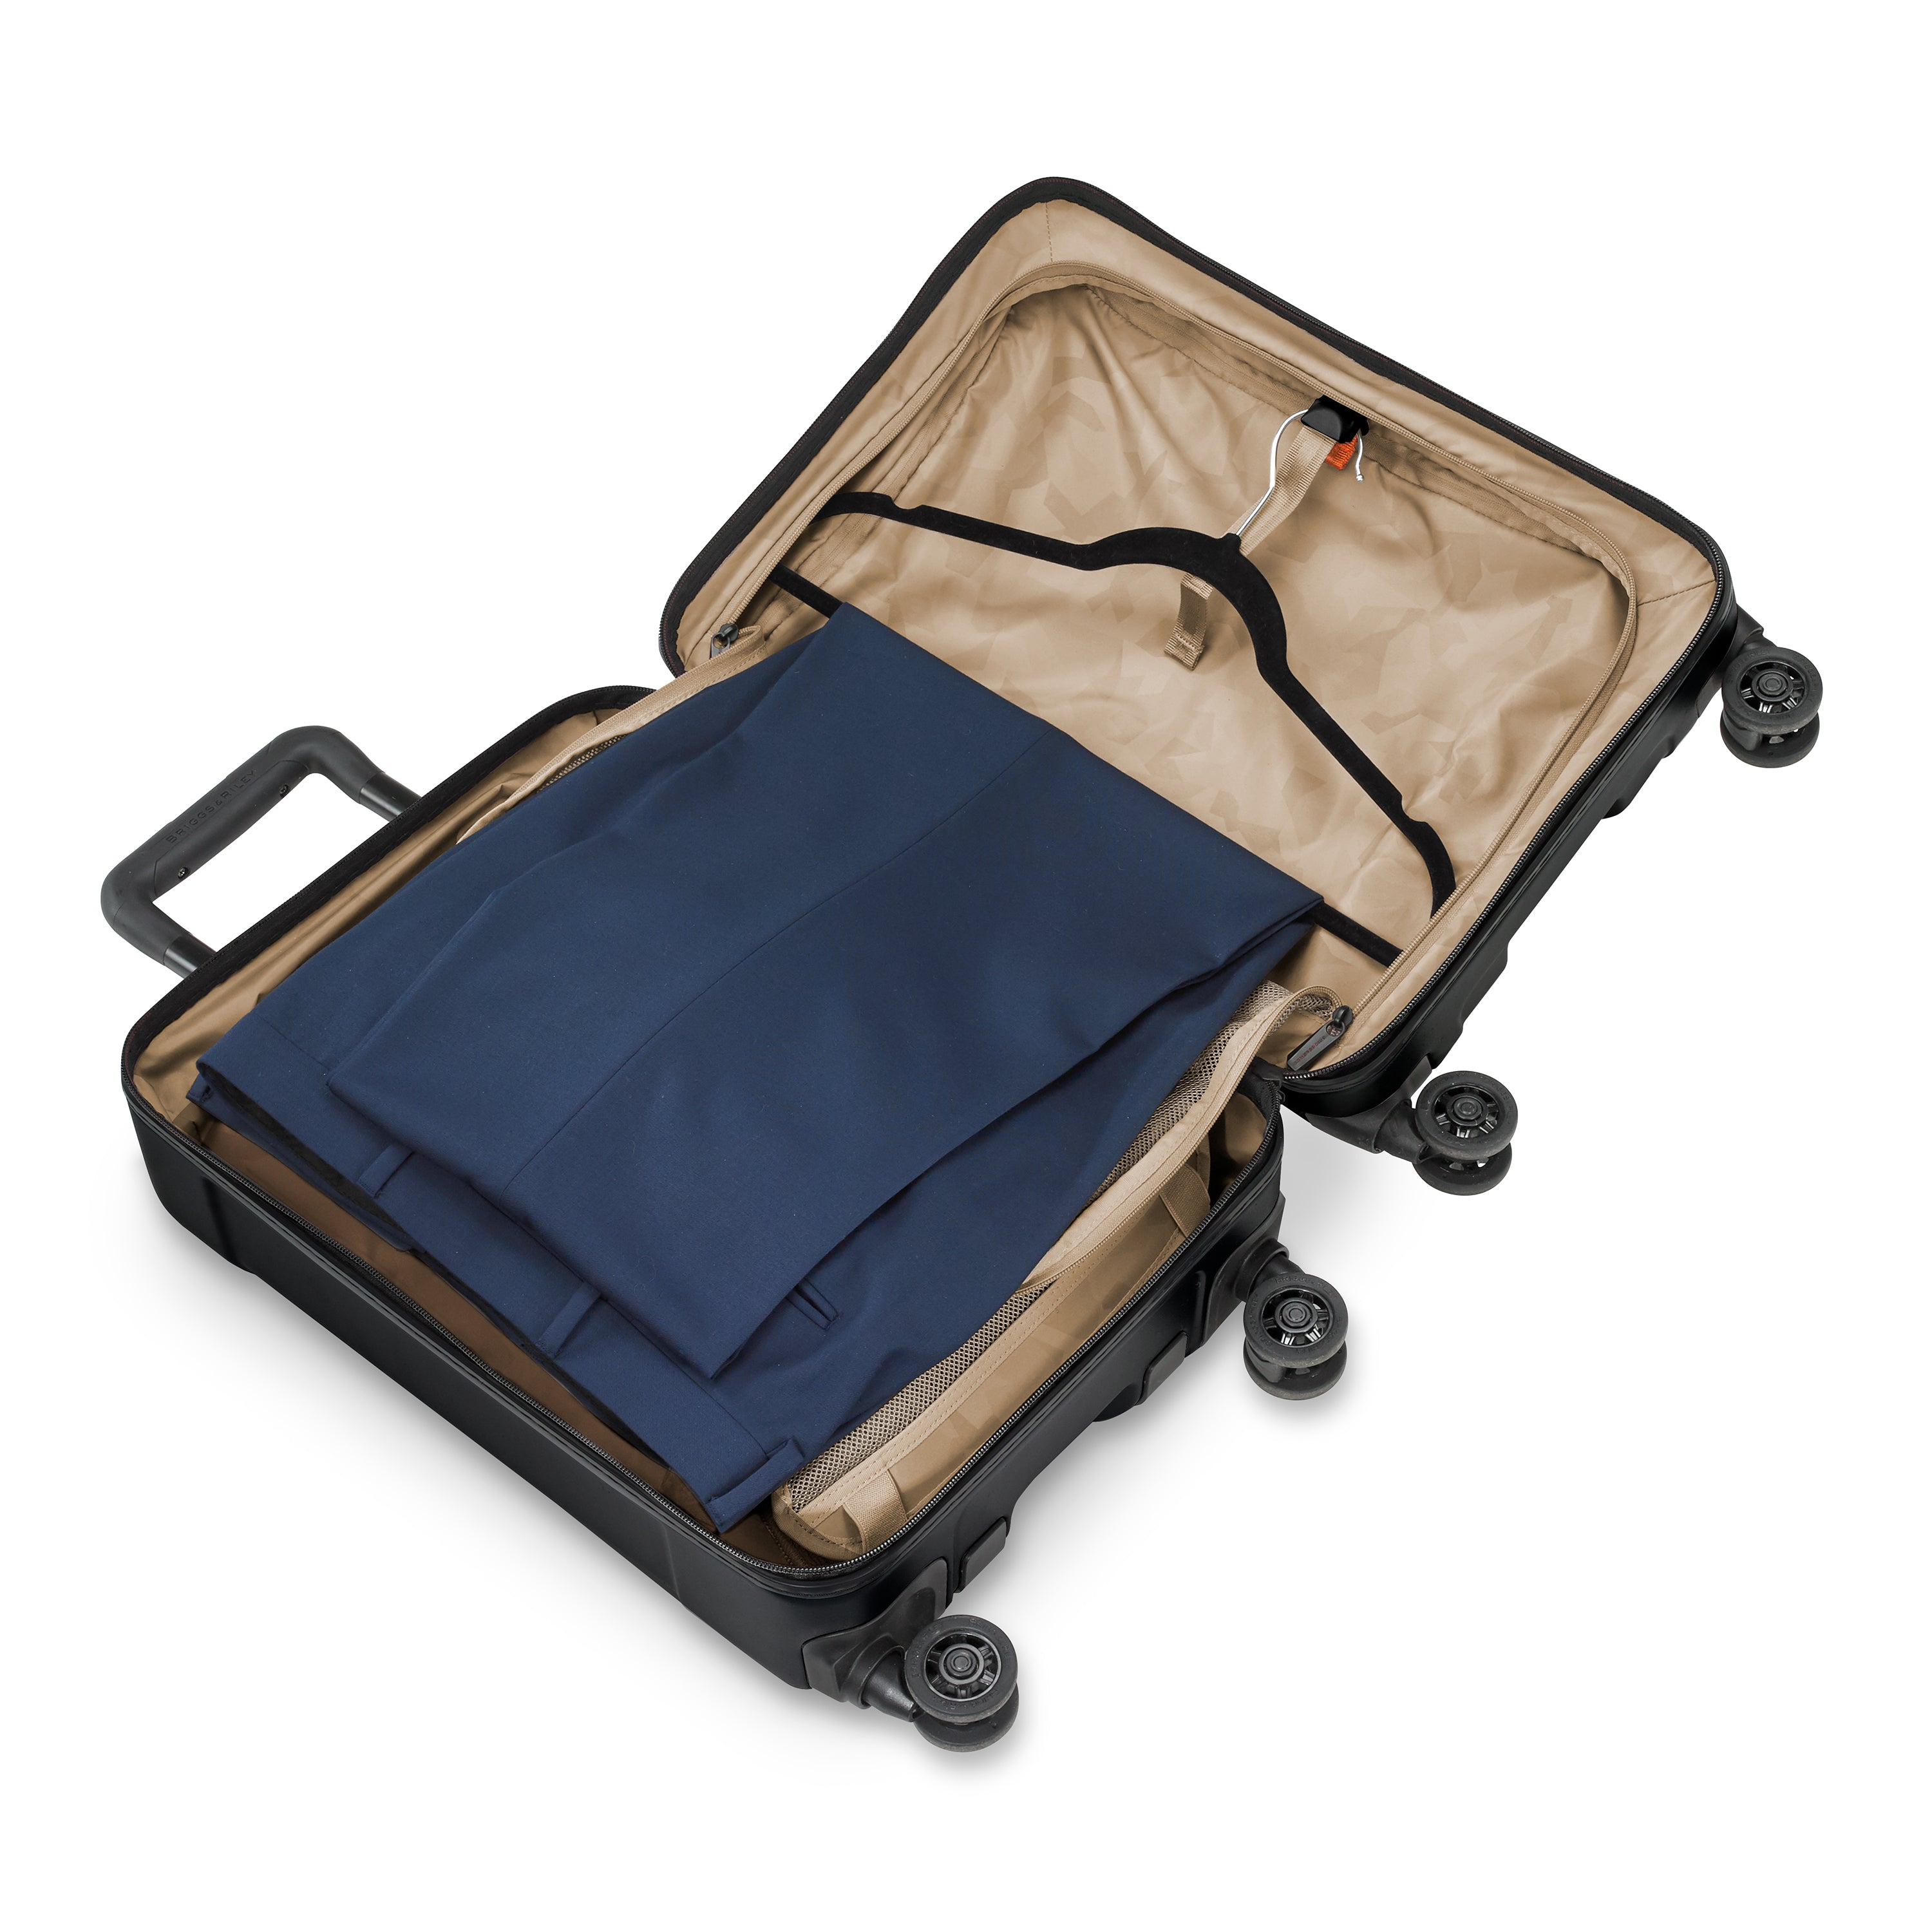 Briggs & Riley Torq International Carry-On Spinner - Stealth